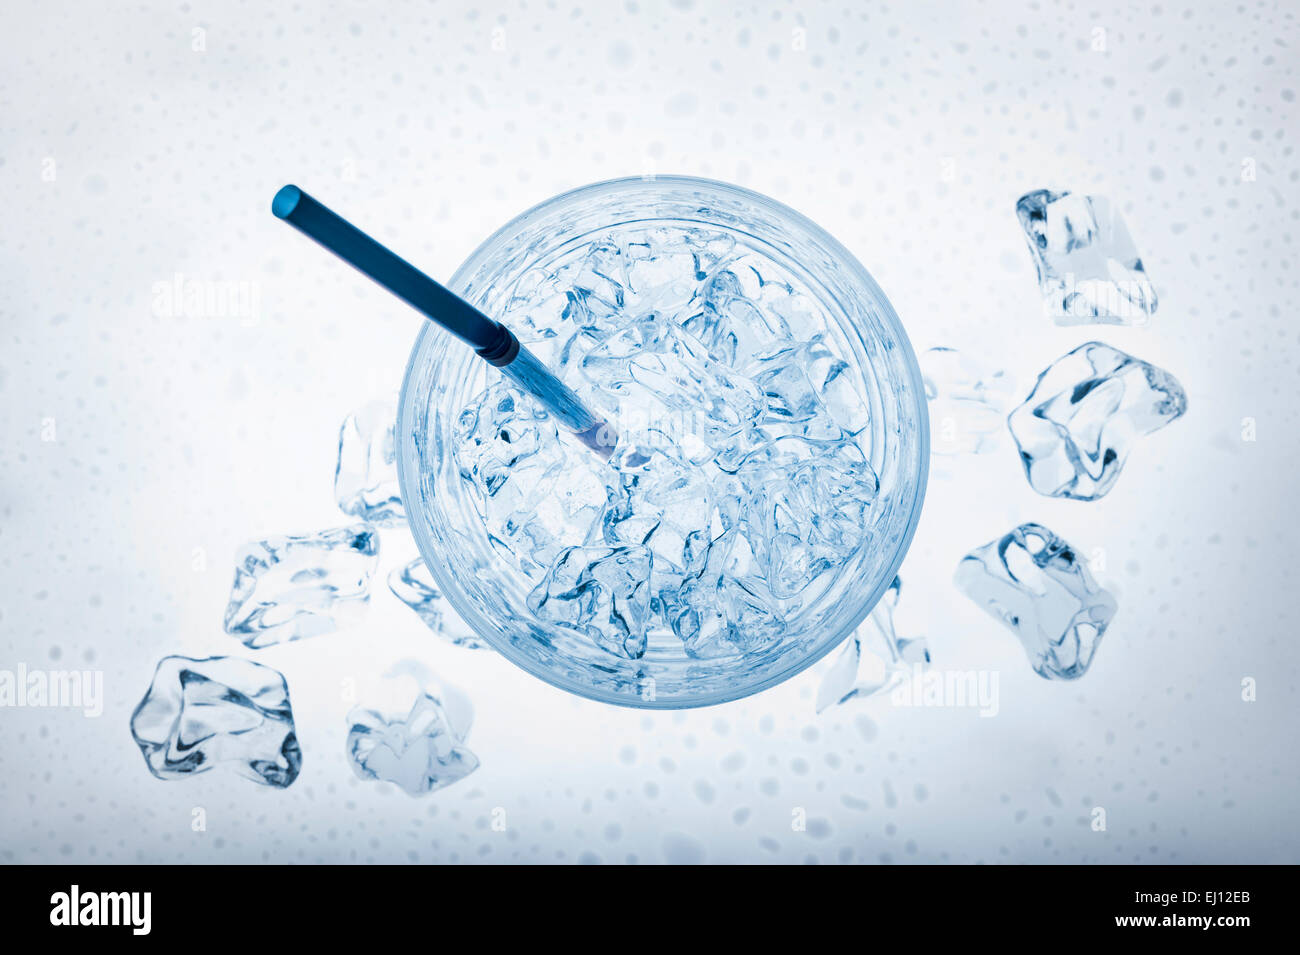 glass full of fresh water with ice cubes and thin cane, on blue background Stock Photo